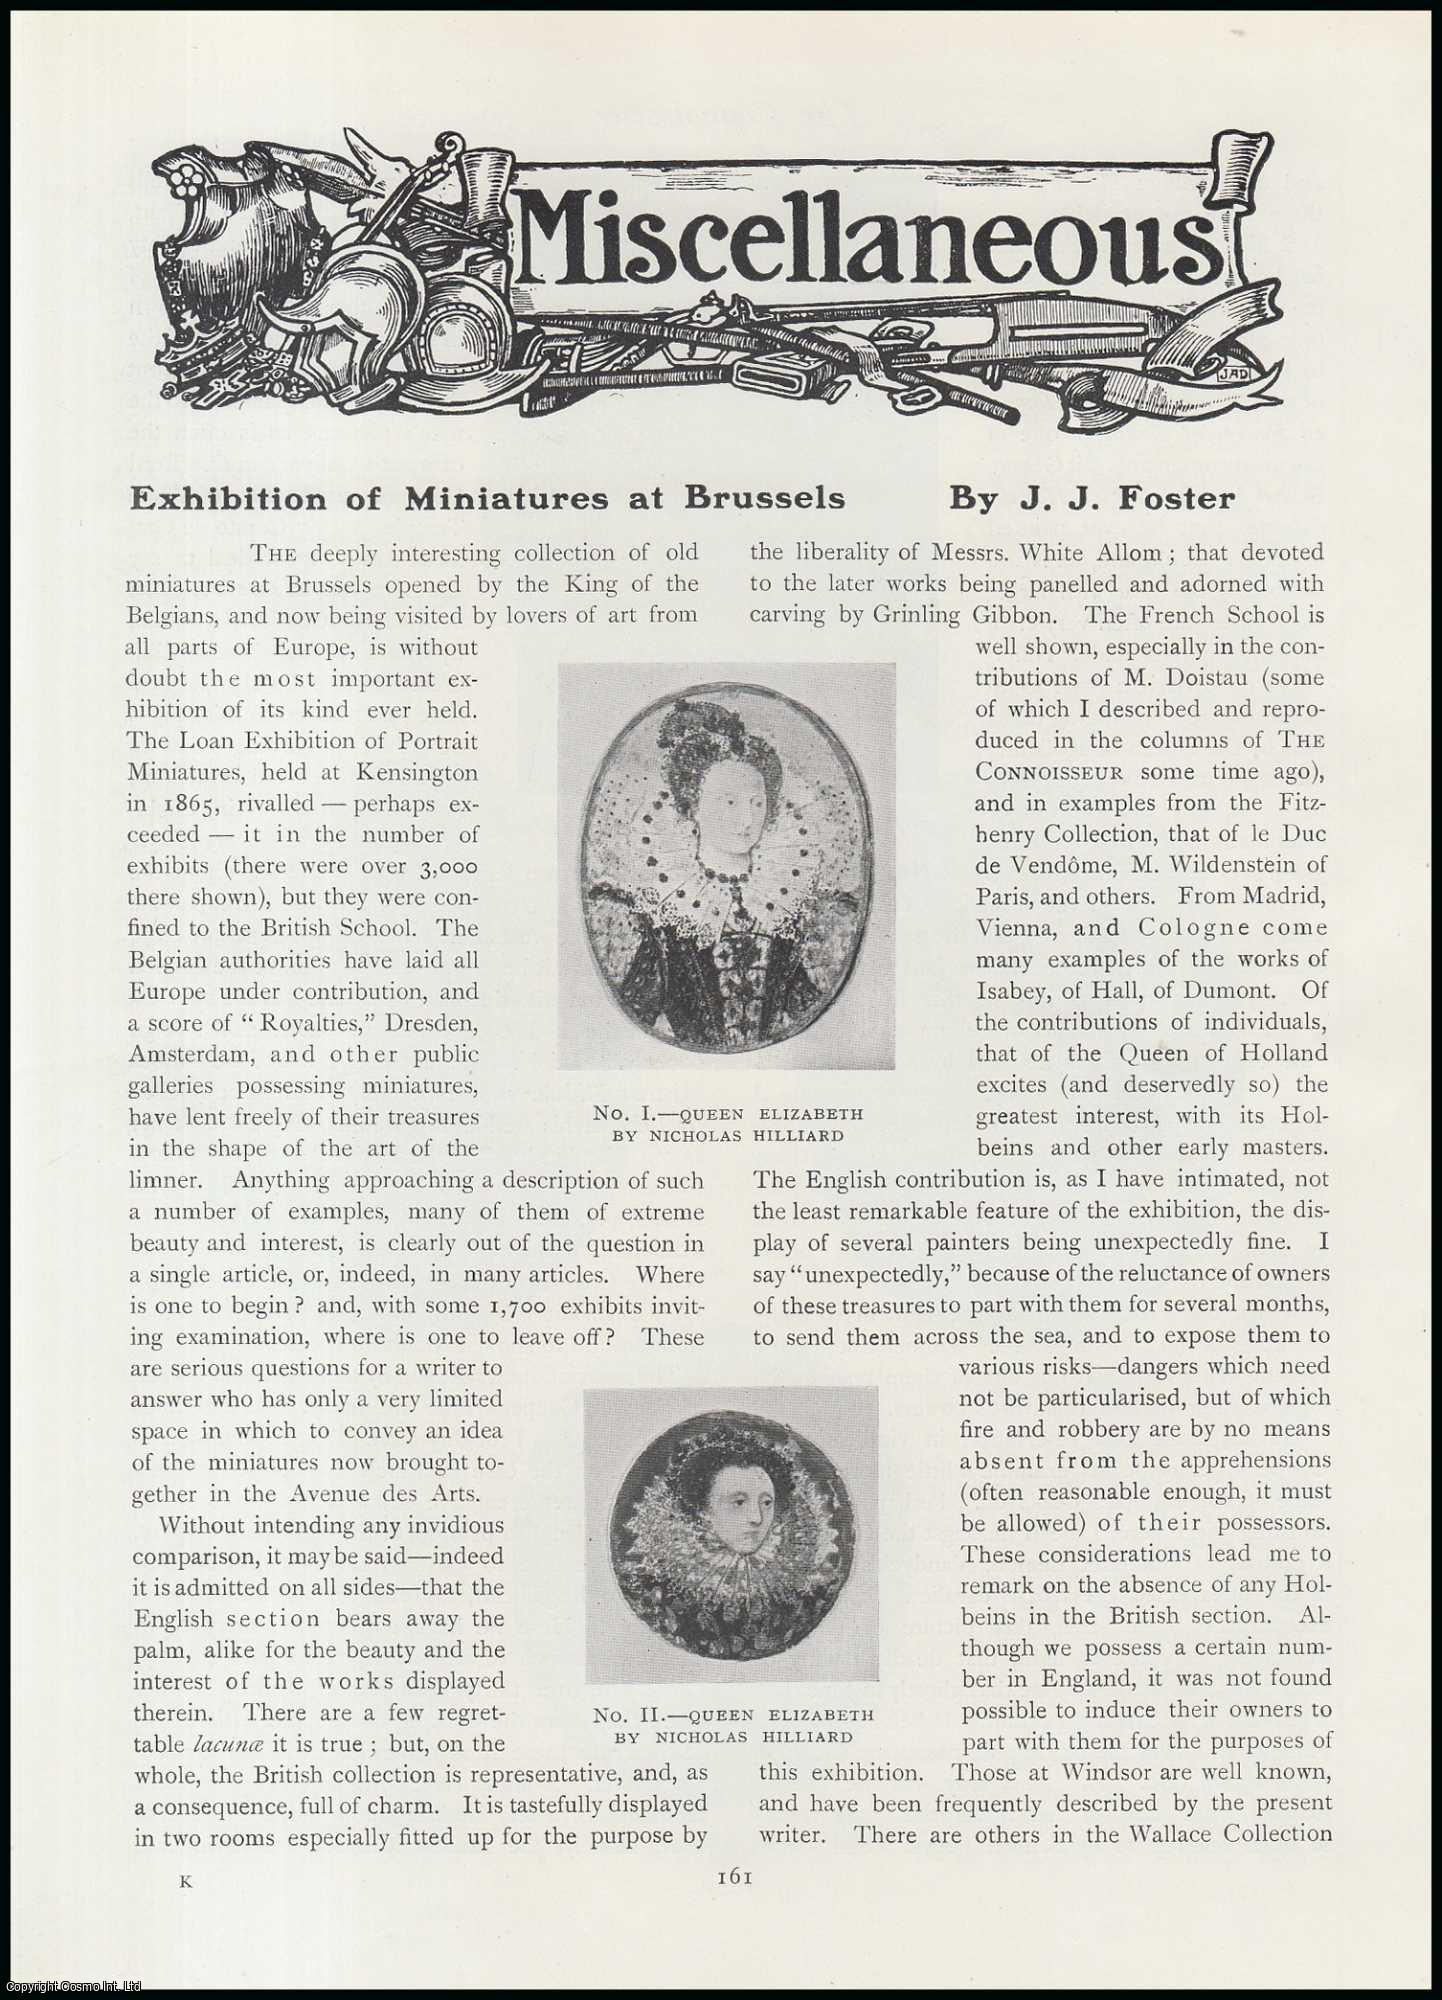 J.J. Foster - Exhibition of Miniatures at Brussels, Belgium : Opened by The King of Belgians. An original article from The Connoisseur, 1912.